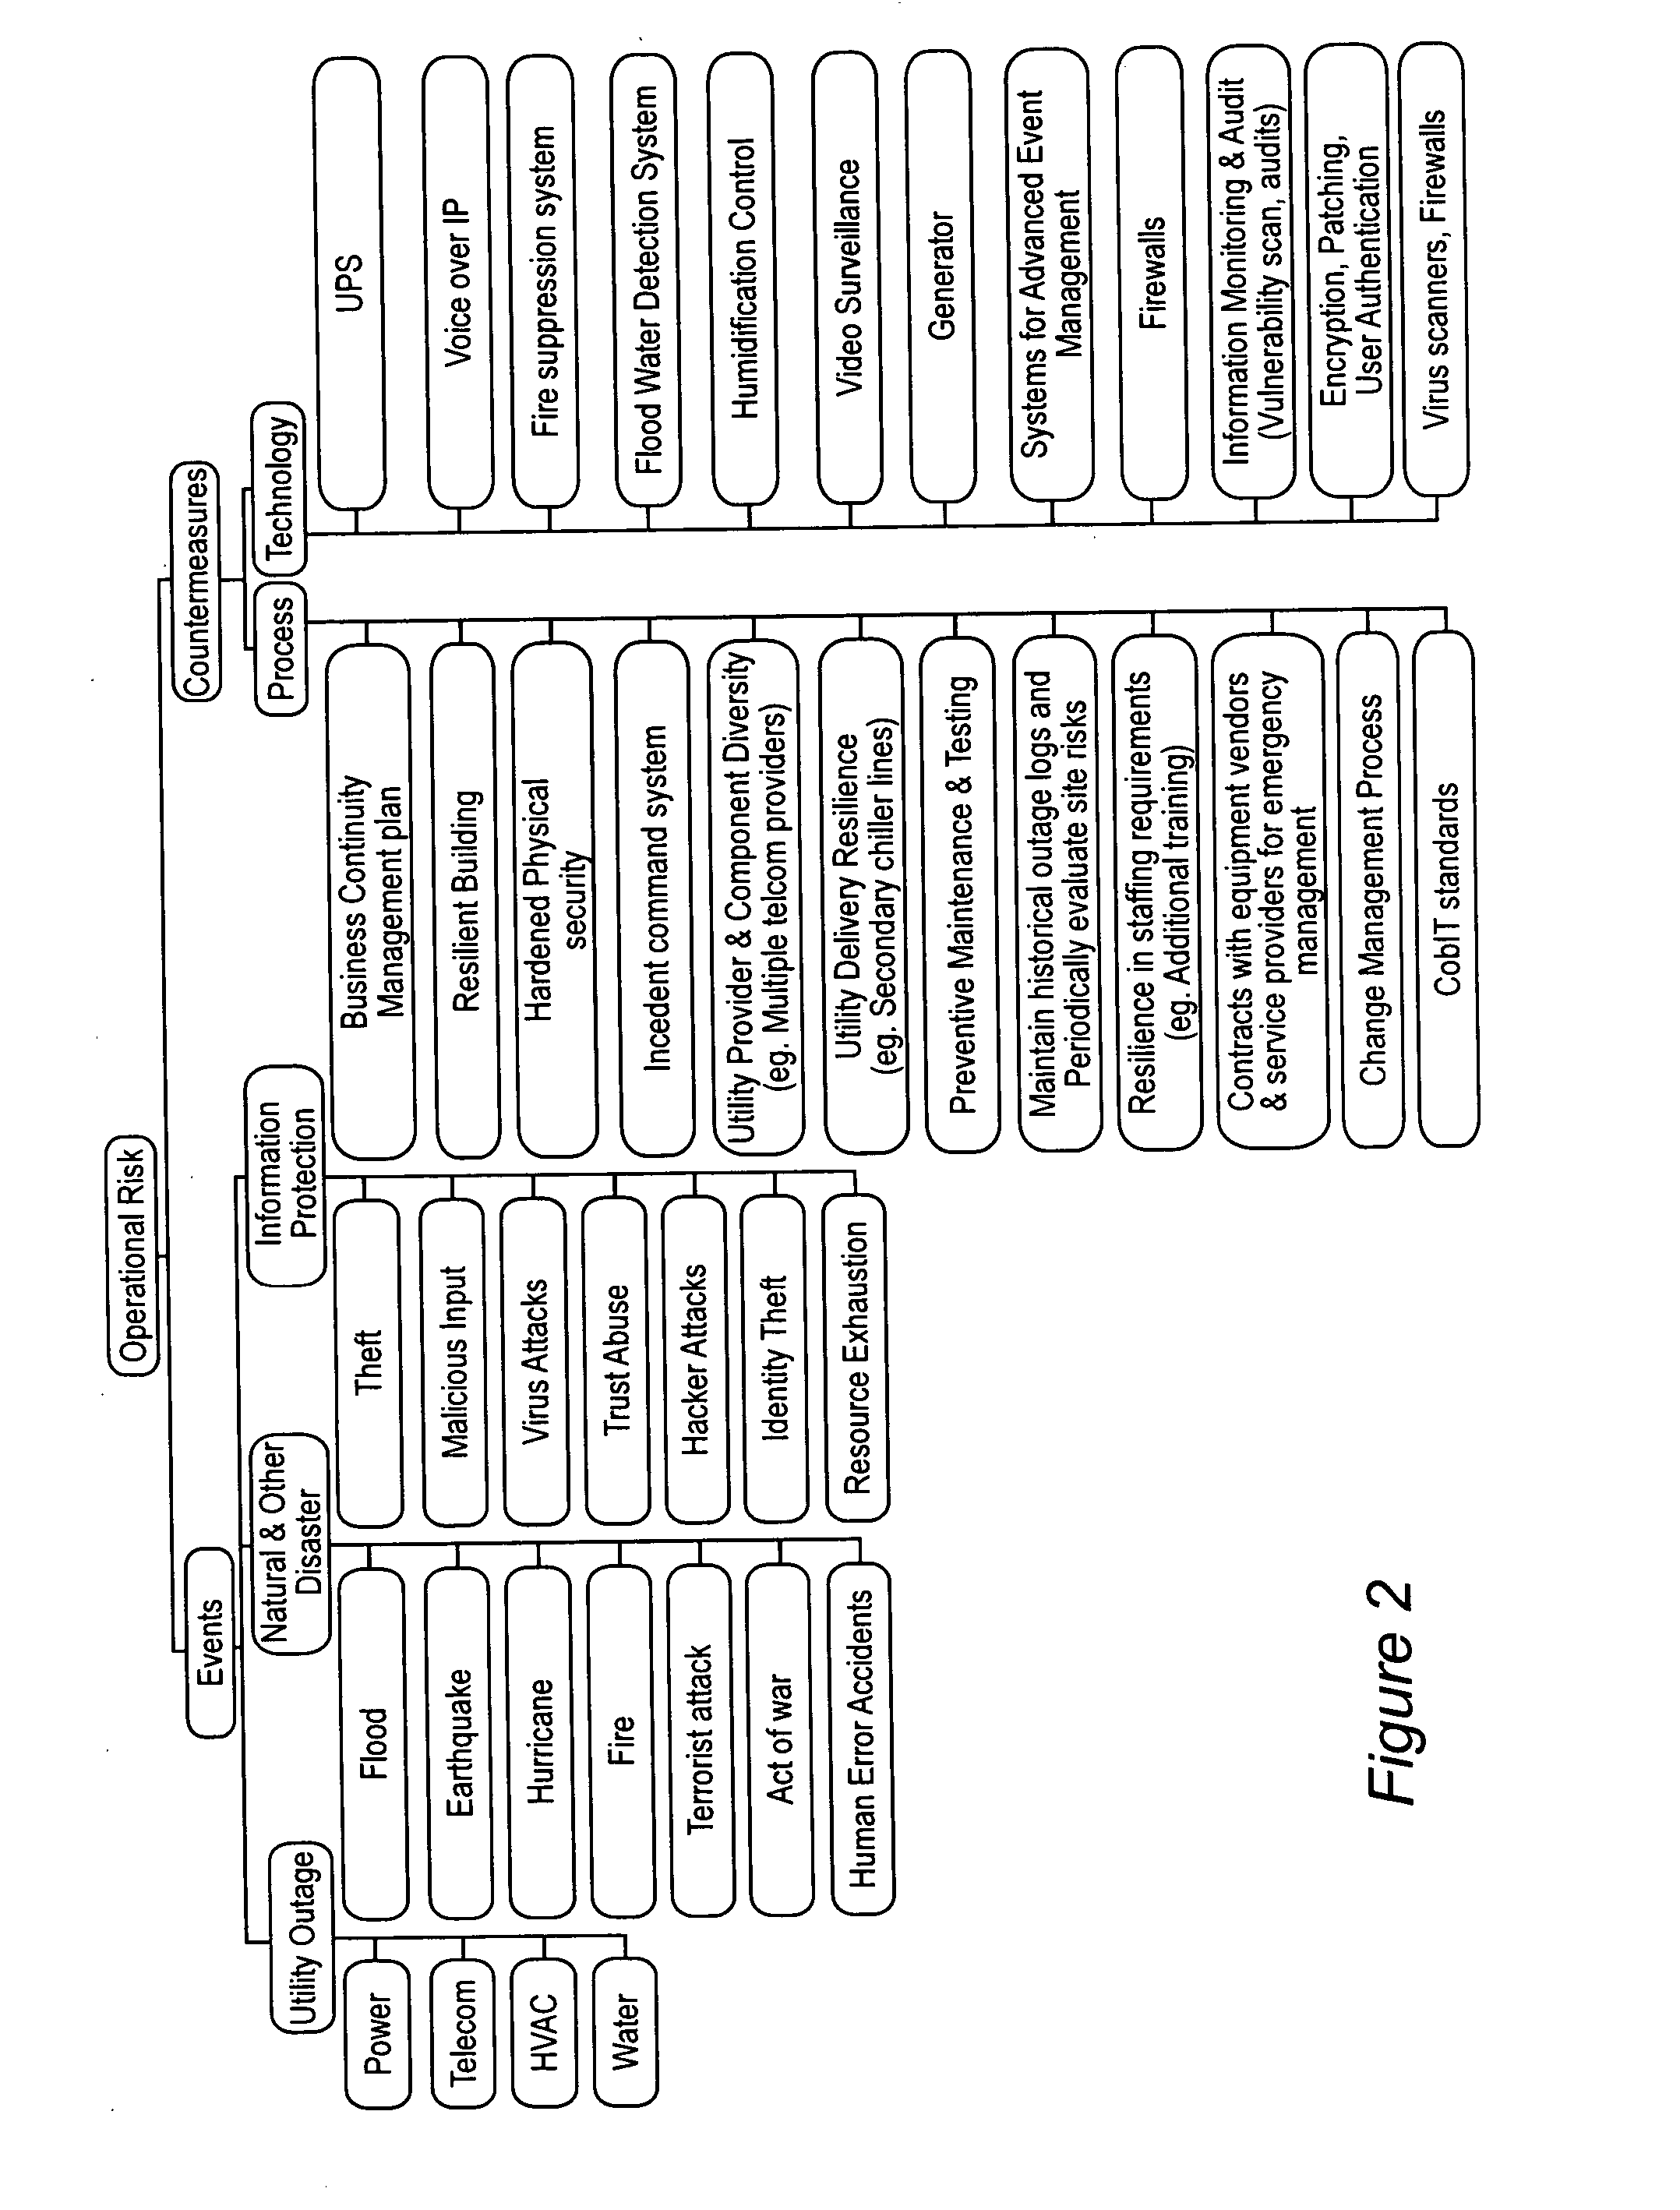 Method and apparatus for operational risk assessment and mitigation